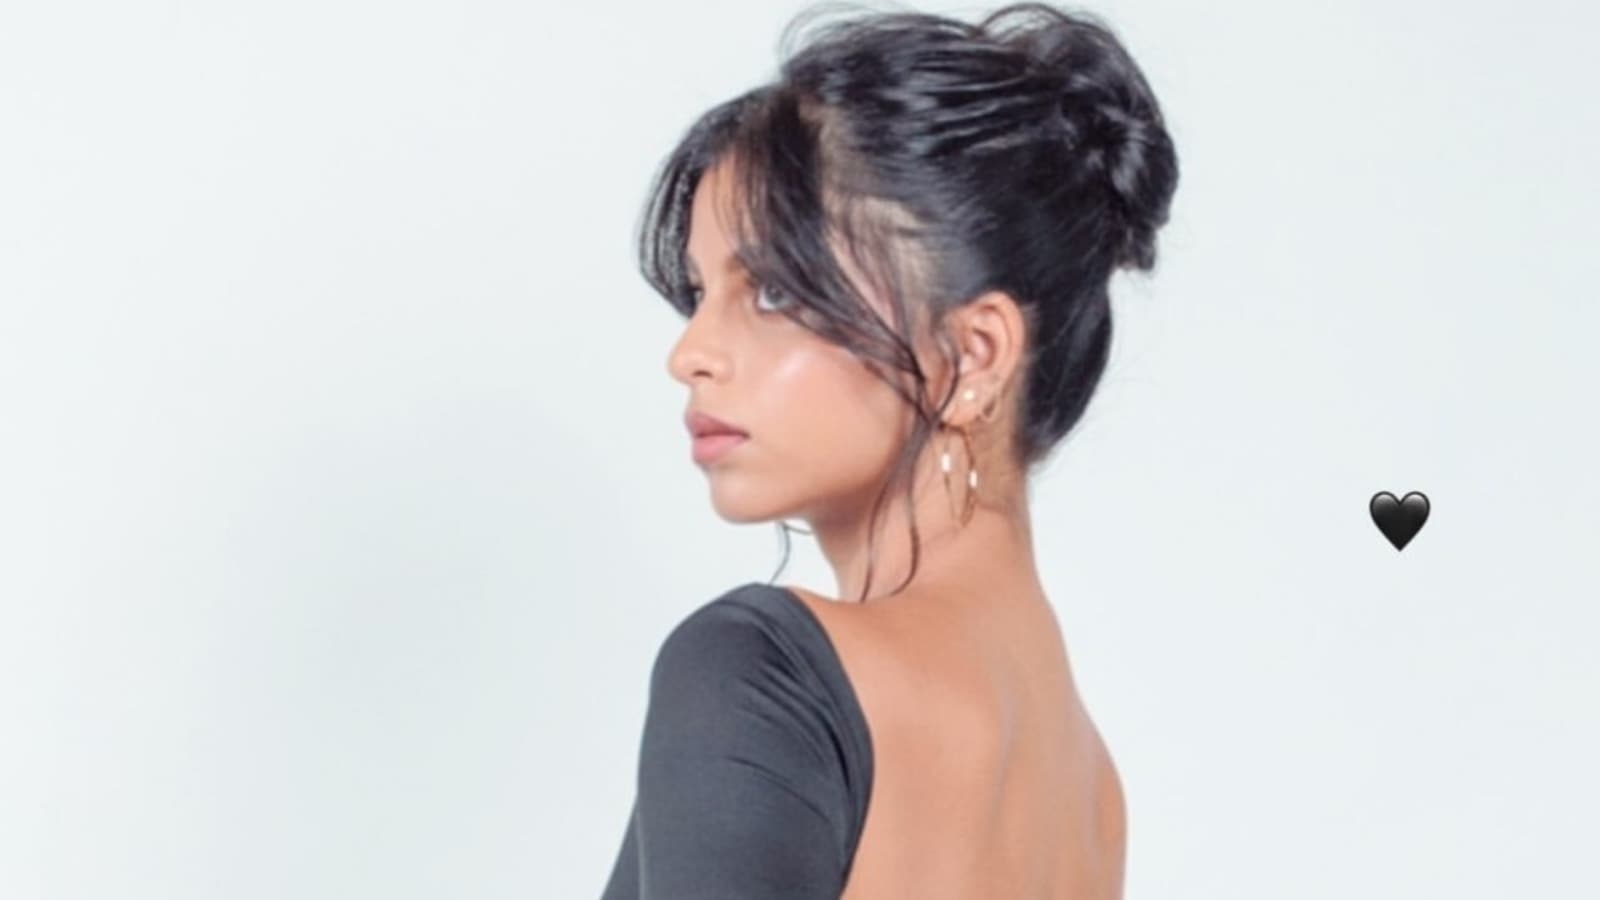 Suhana Khan’s photo in backless black dress serves retro summer vibes: Fans say ‘gorgeous Veronica’